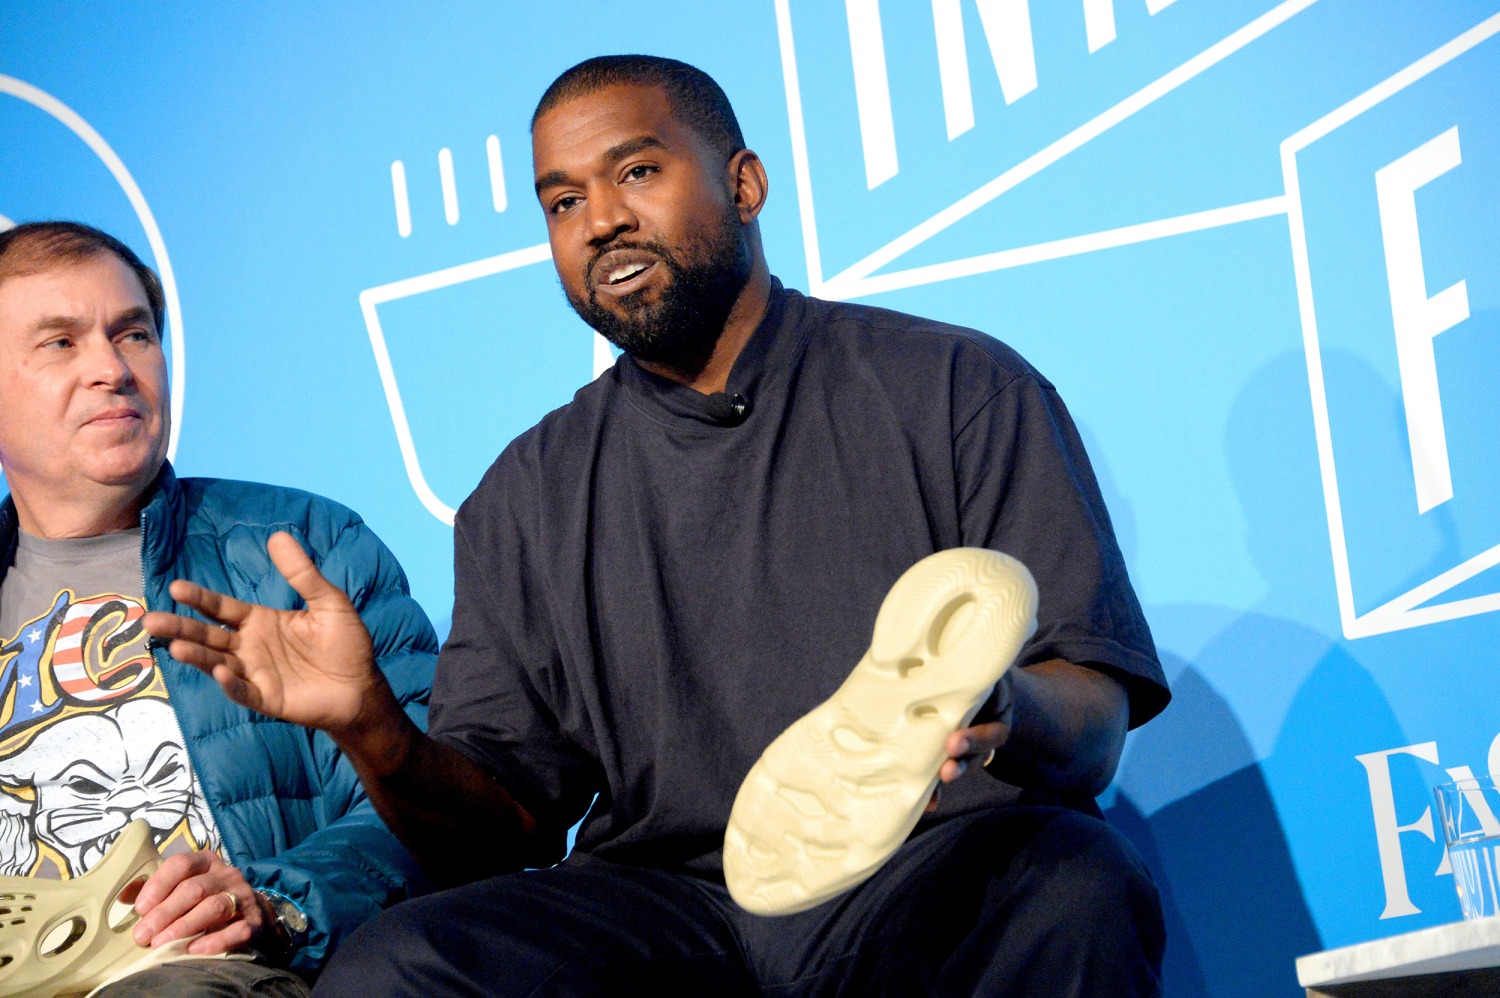 Choose 2 Kanye West Shoes out of them all